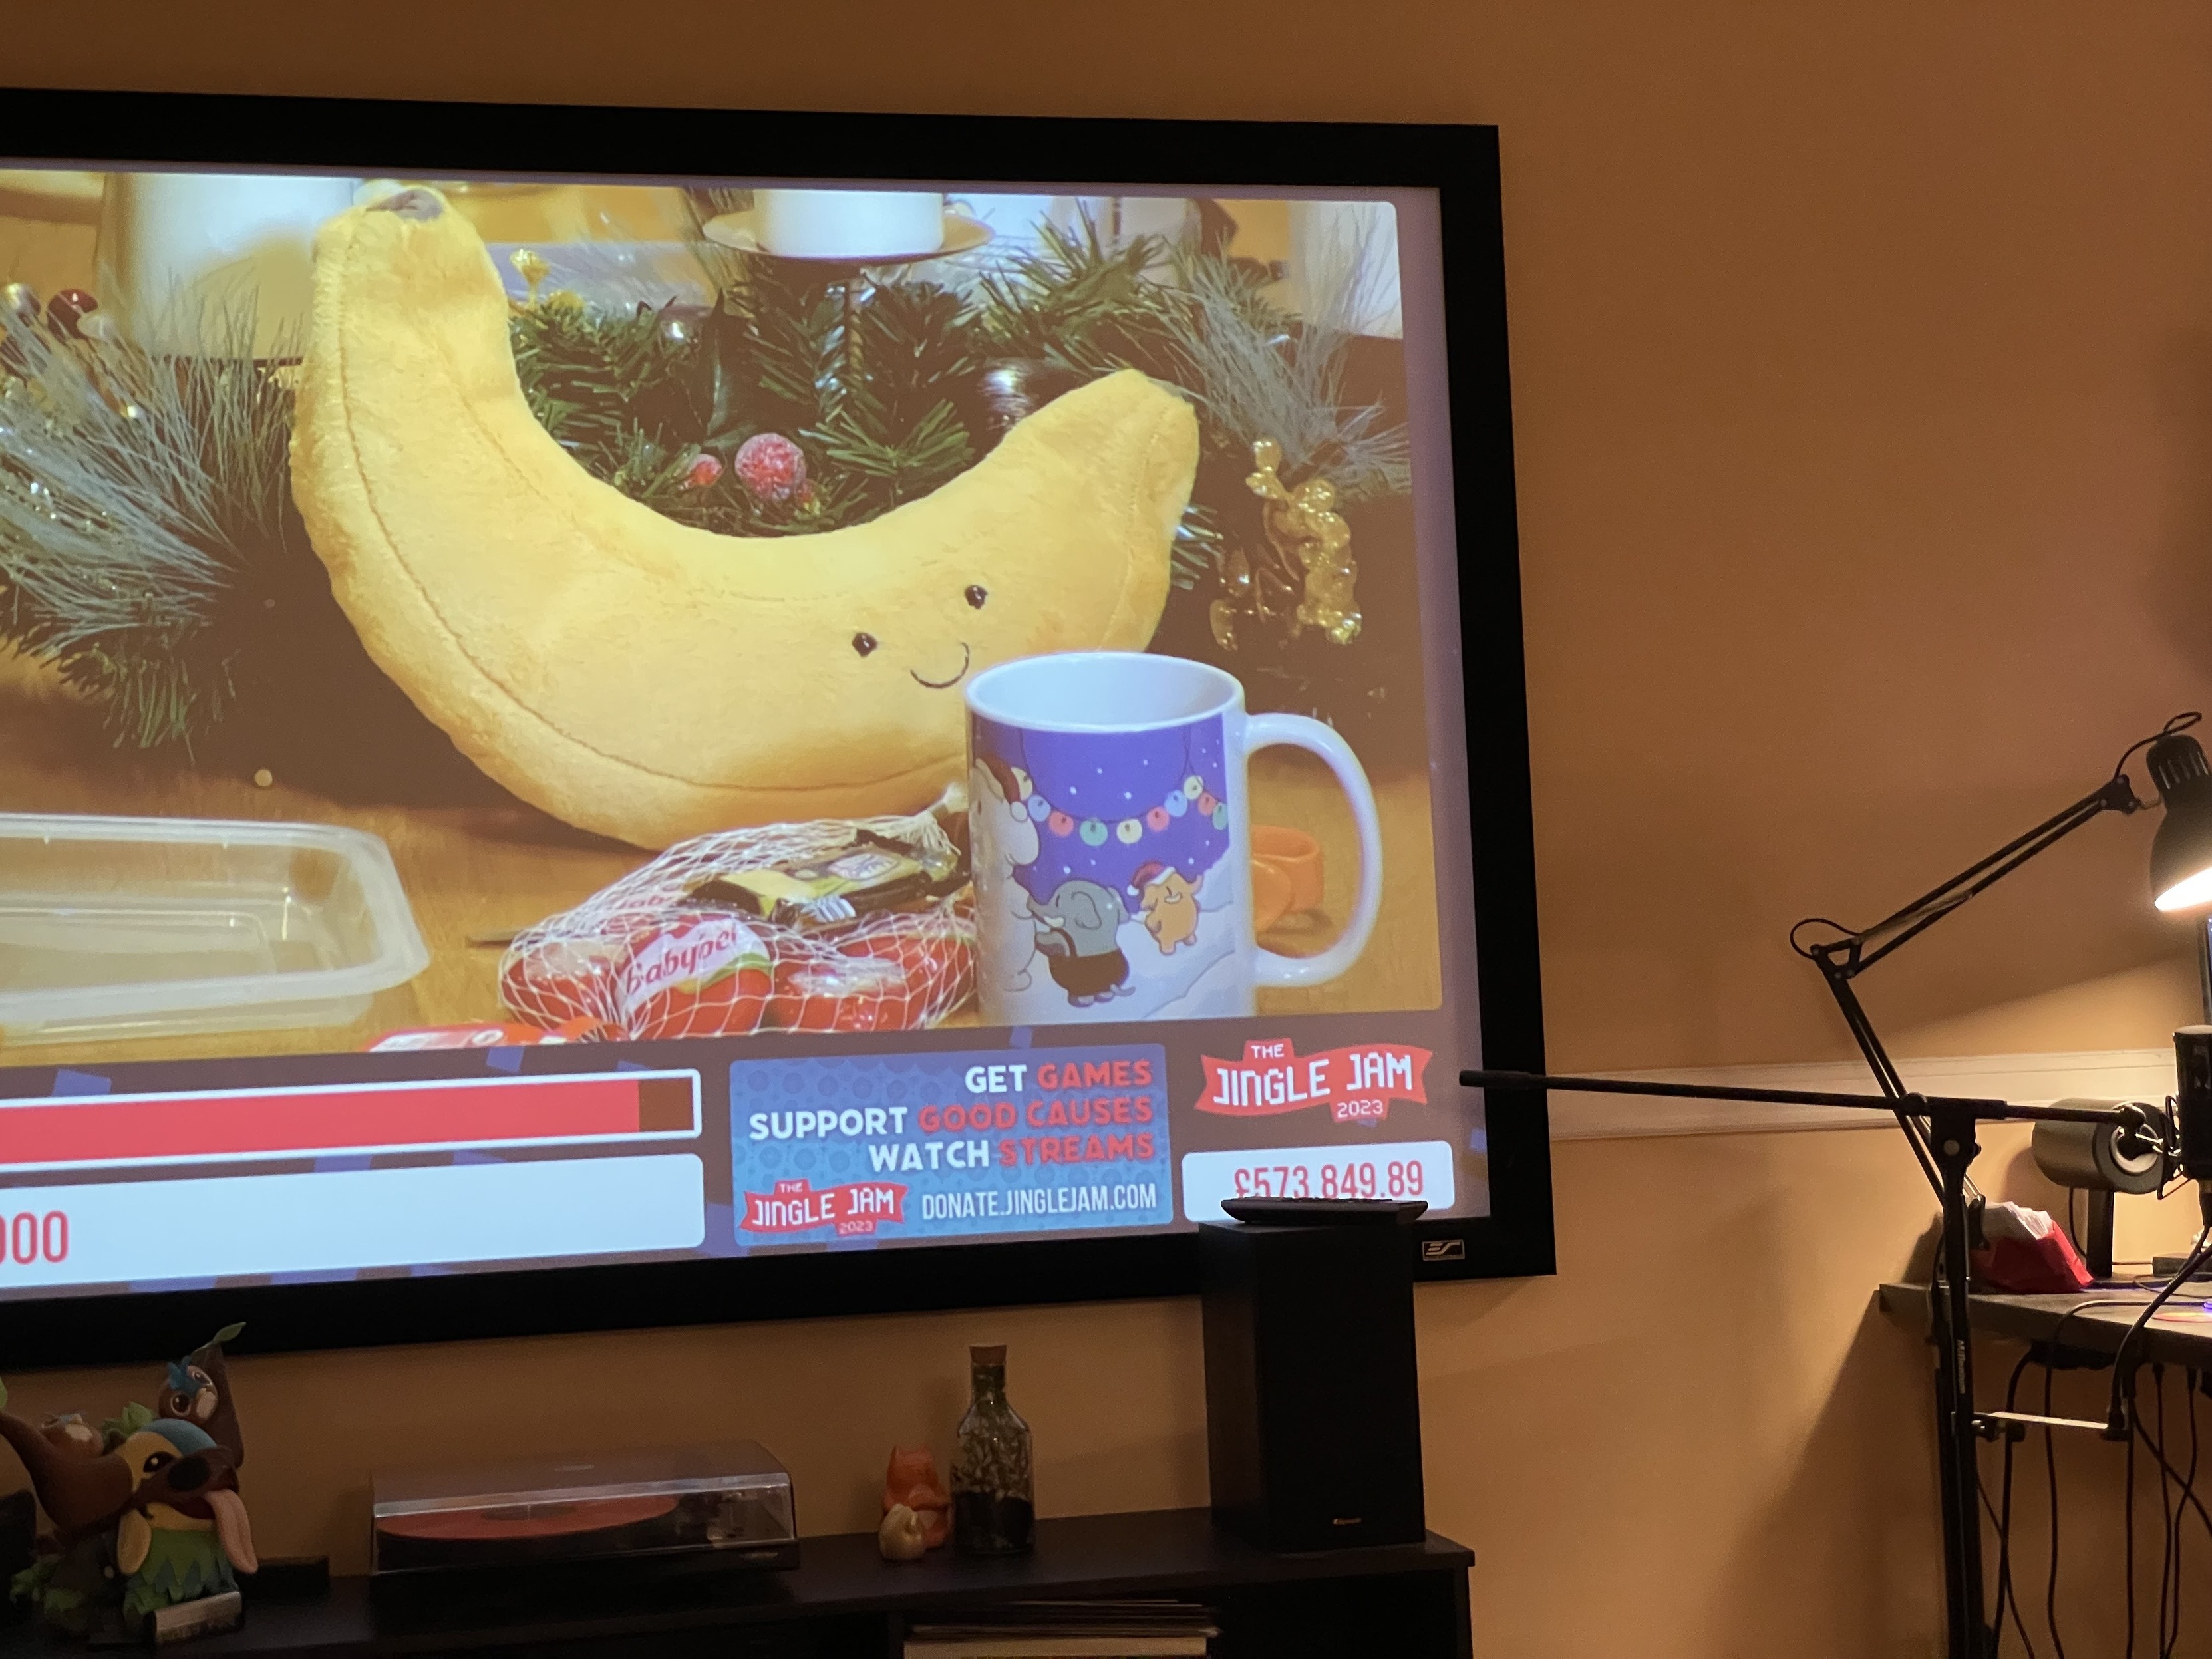 A large projector screen showing the Jingle Jam stream on Twitch. The stream is on break and showing the feed from the Yogscast office. On the coffee table, next to a large banana plushie, stands a mug featuring colorful elephants building an elephant snowman under a blurple sky. 